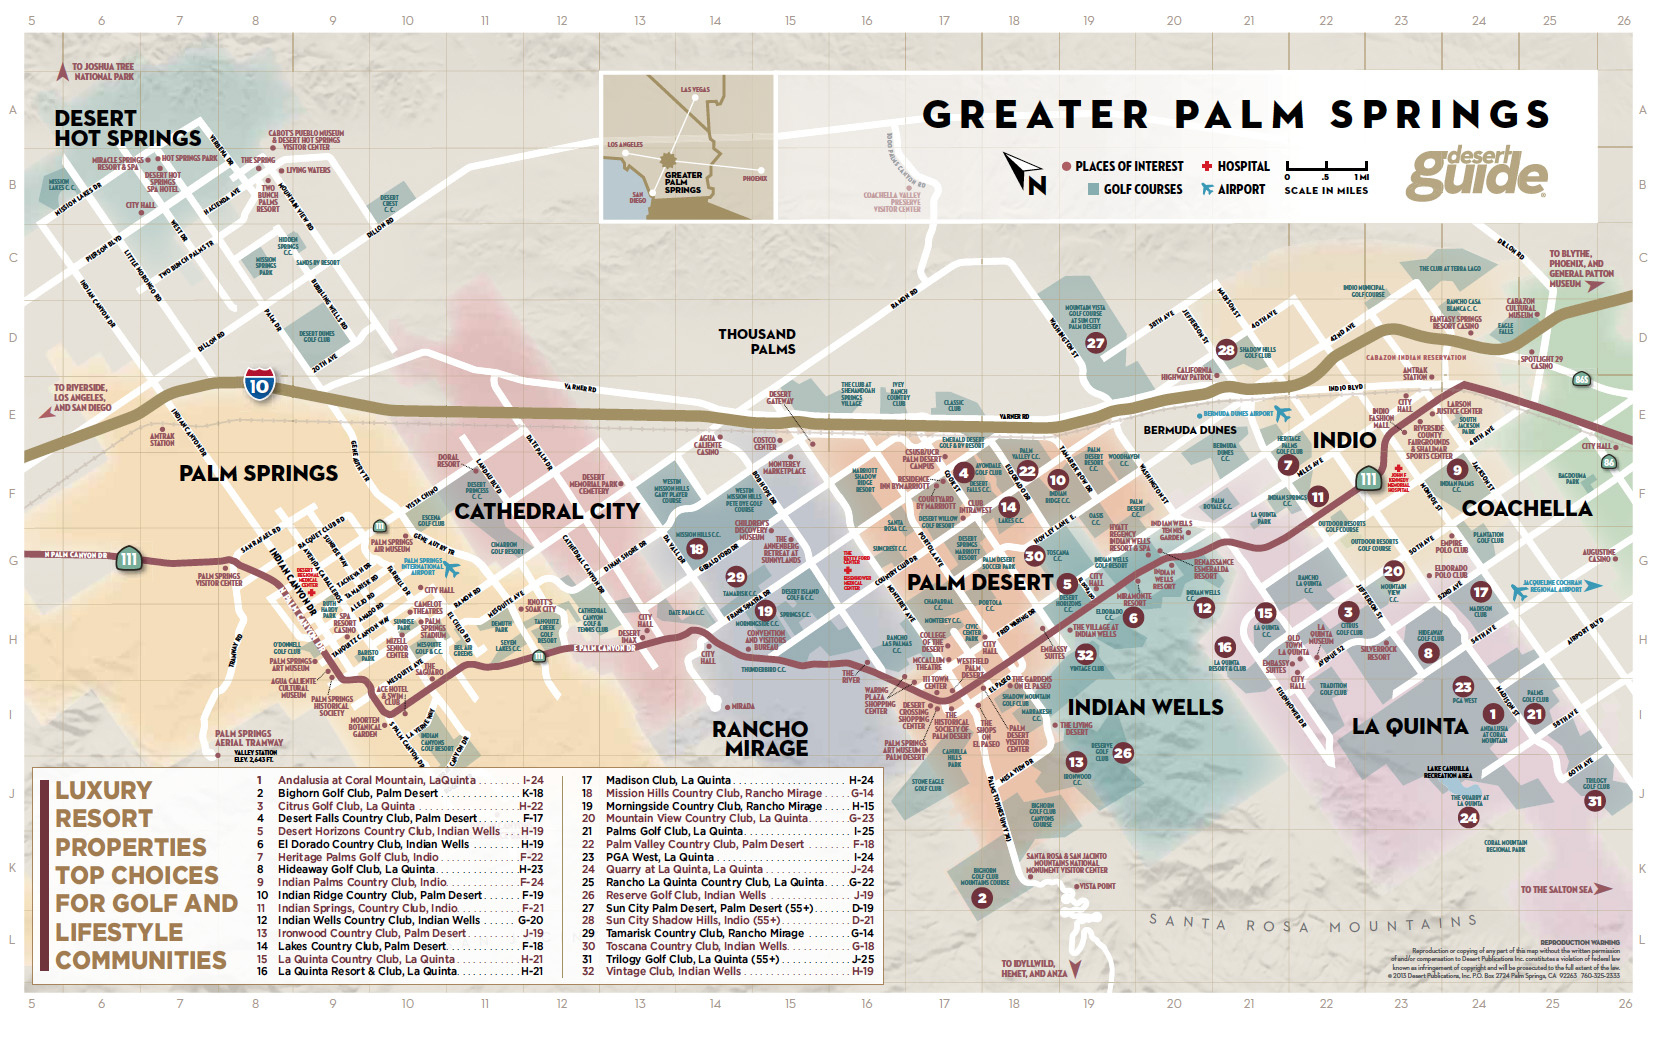 Map Of Palm Springs California And Surrounding Area Printable Maps